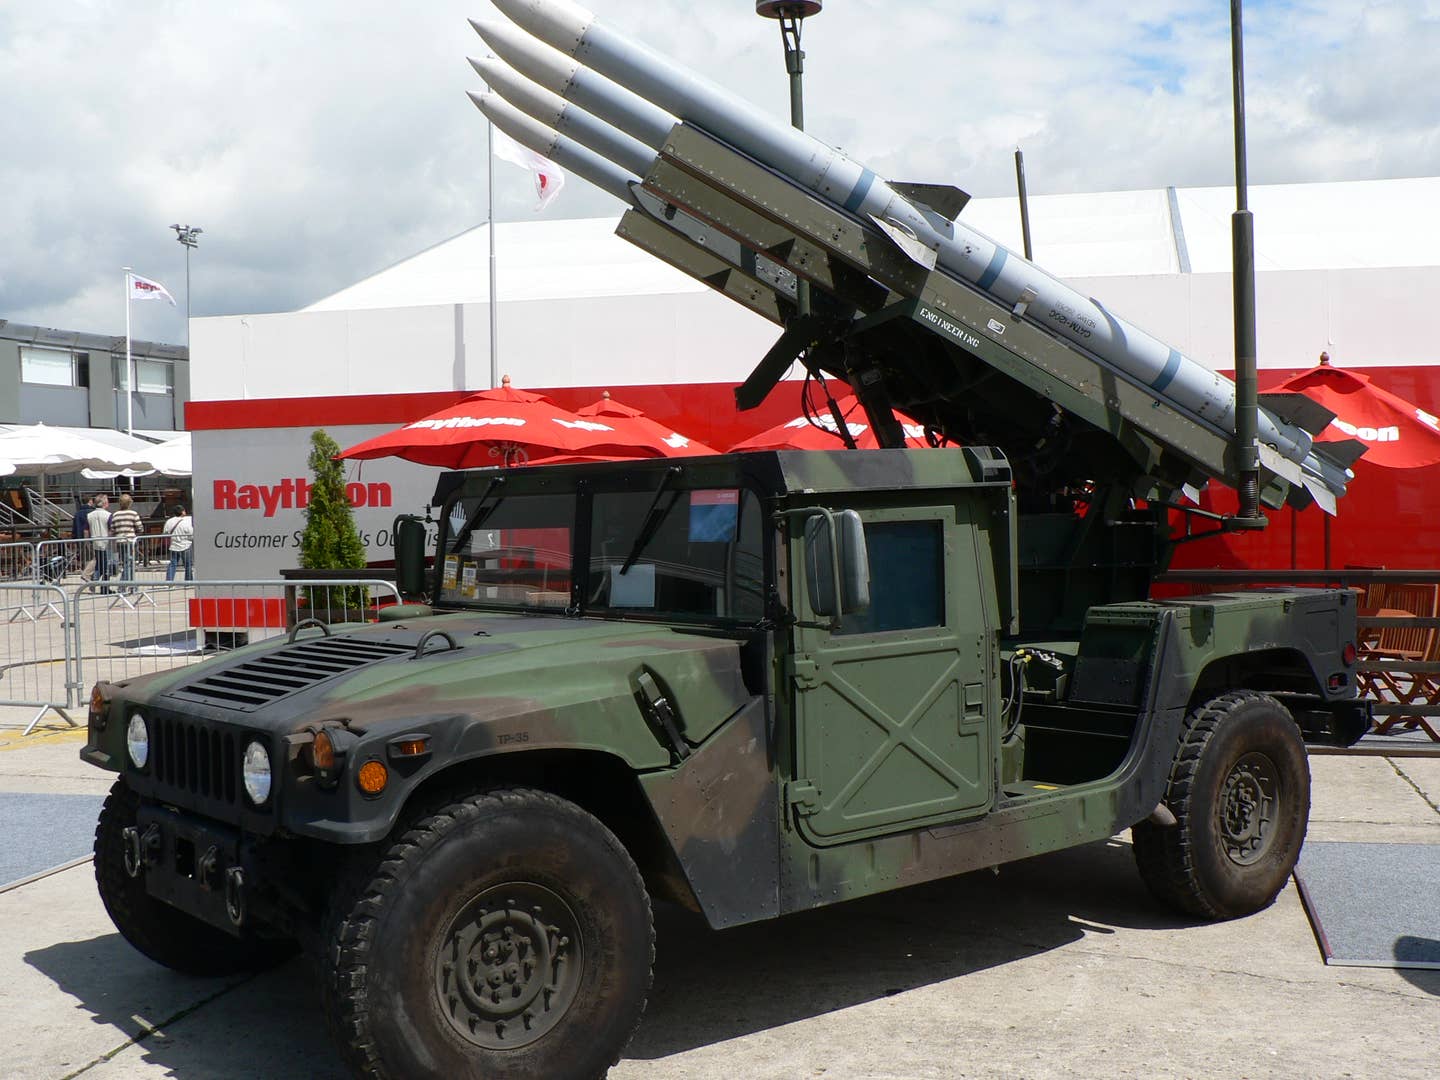 A Humvee equipped with surface-launched AMRAAMs, as offered in the past by Raytheon. <em>Wikimedia Commons</em>